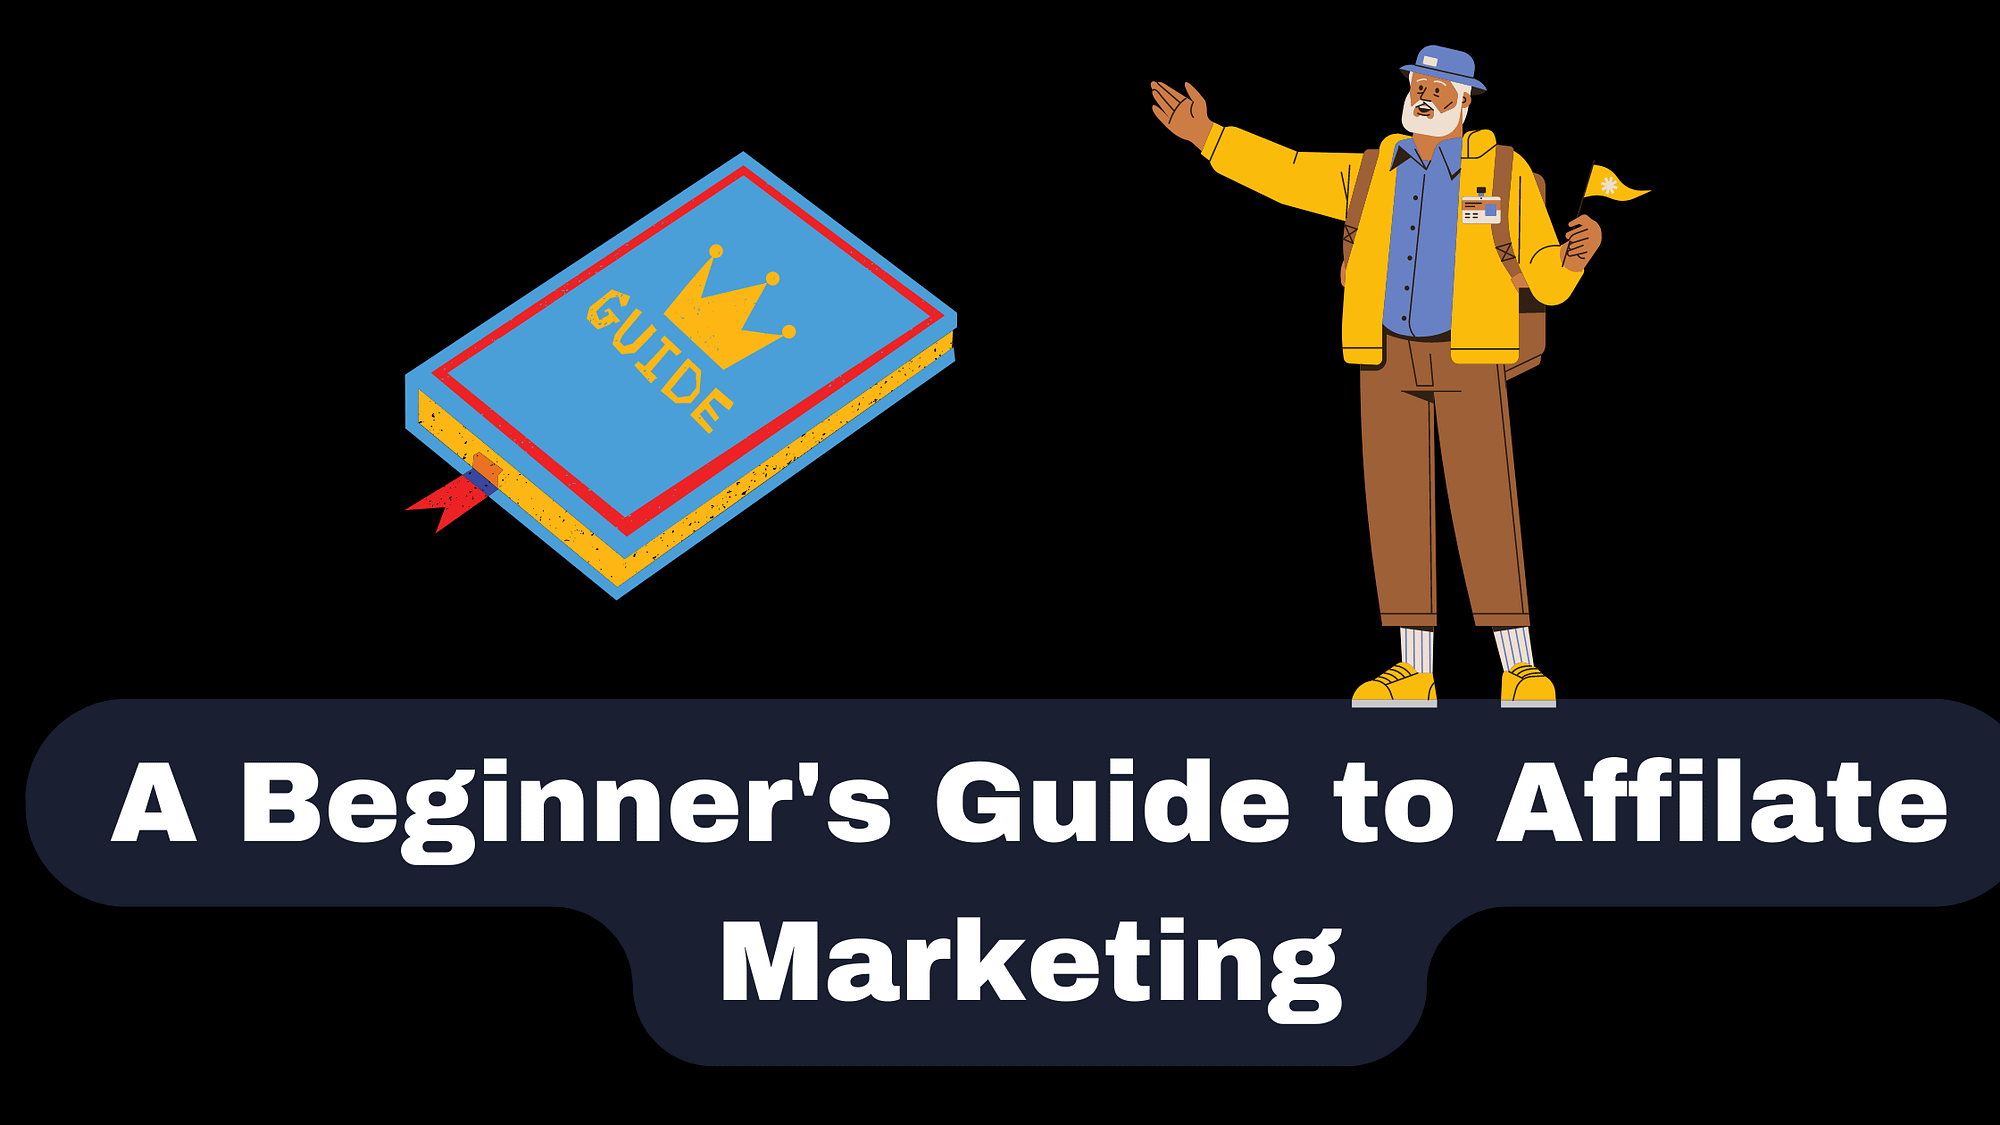 A Beginner's Guide to Affiliate Marketing